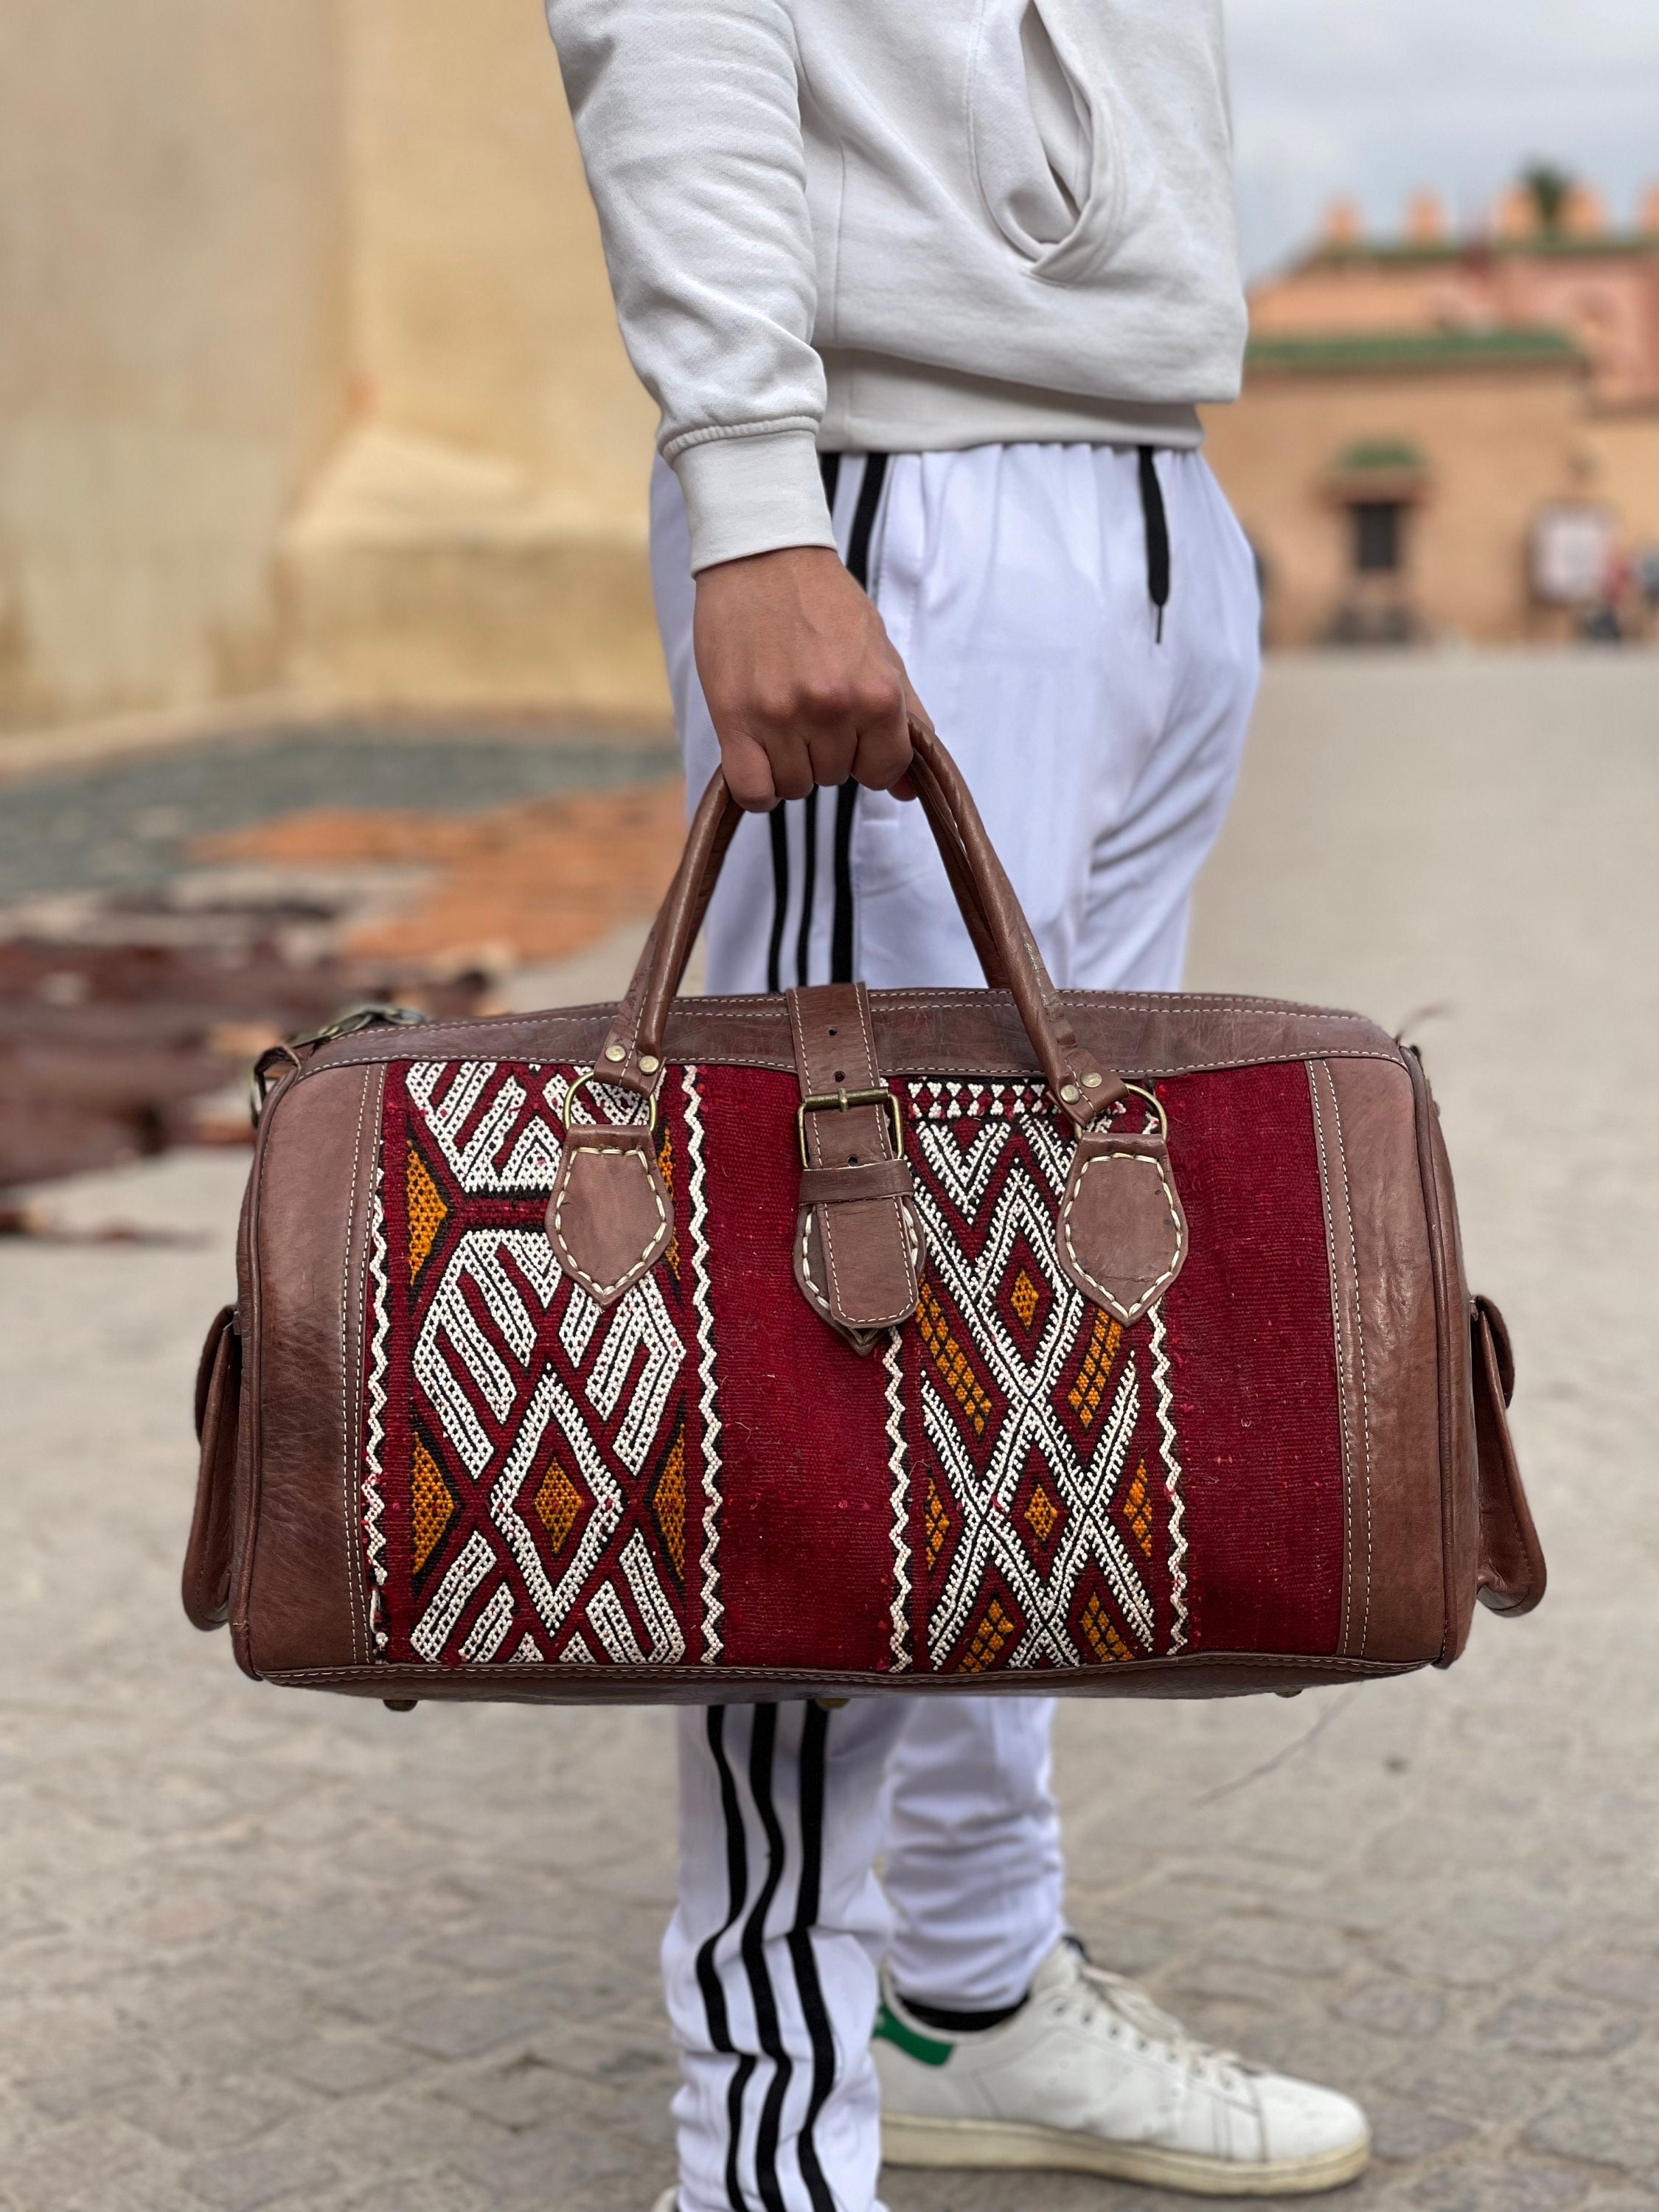 Moroccan Leather Bag: Red